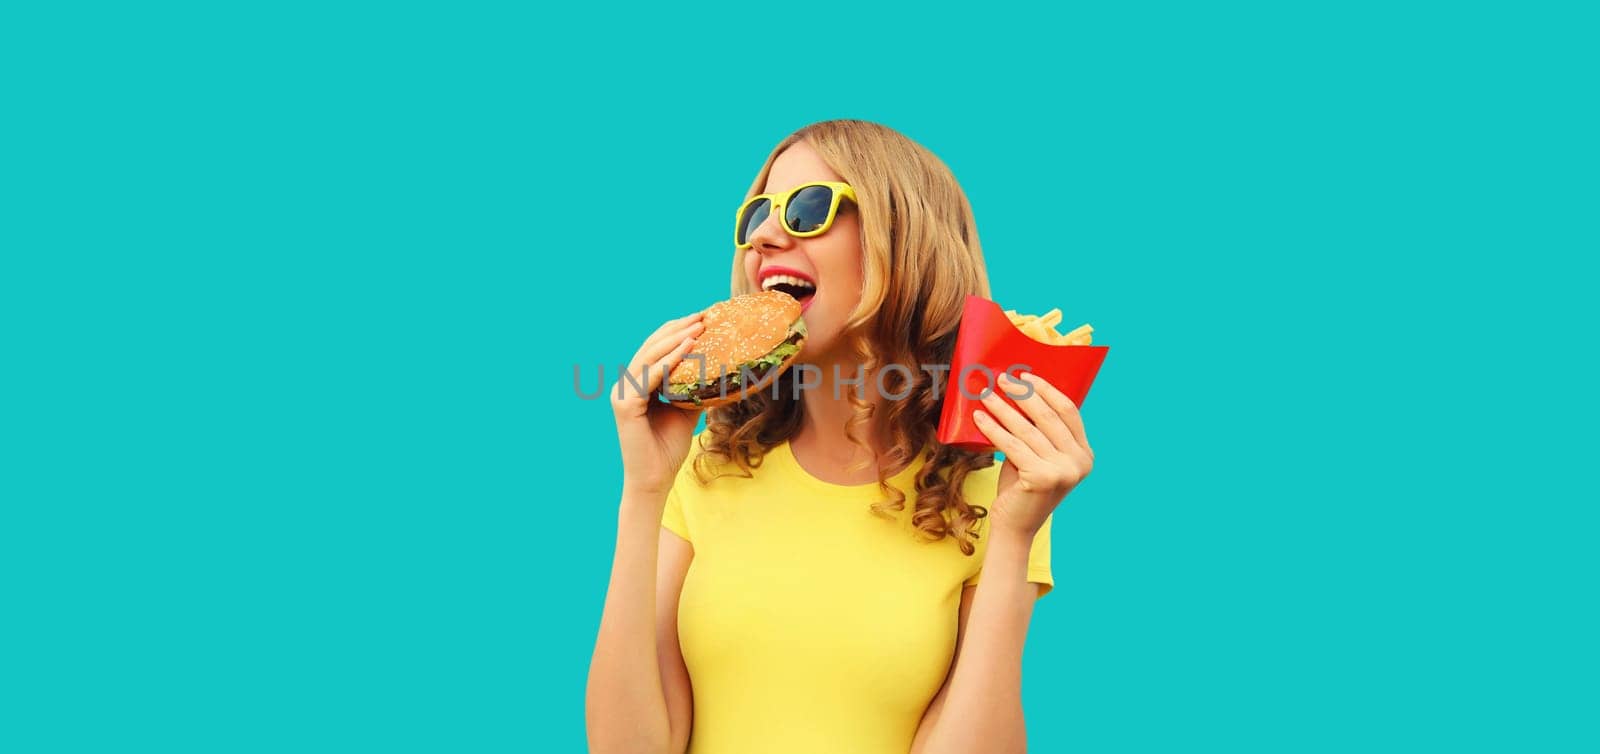 Portrait of happy cheerful young woman eating burger fast food and french fries by Rohappy